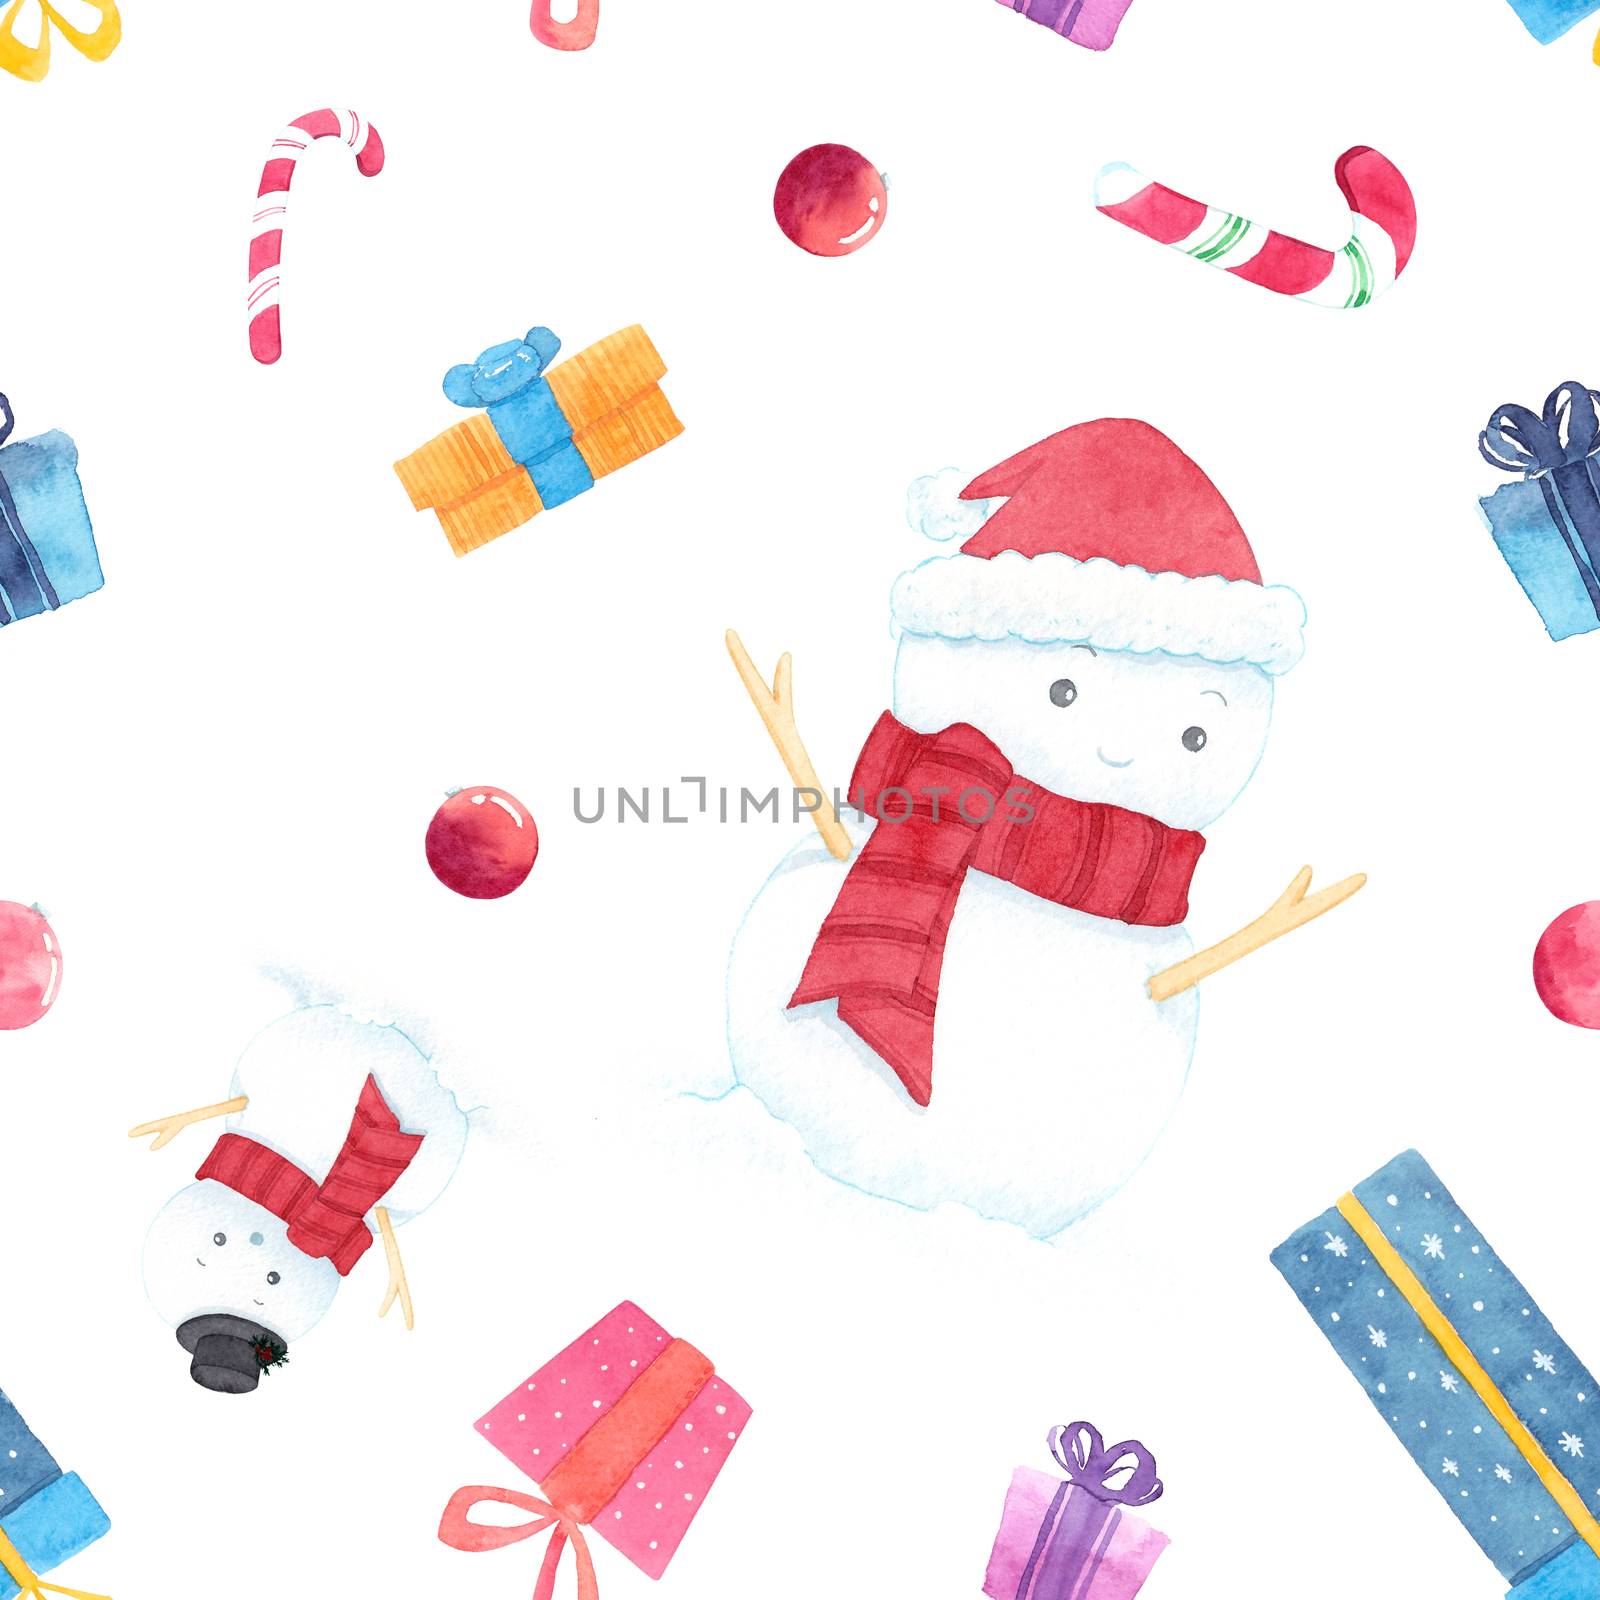 Happy Holidays Seamless Pattern with Colorful Gift Boxes, snow man, candy cane and decoration ball. Design Element Can Be Used for Wallpaper, Packaging, Background. by Ungamrung